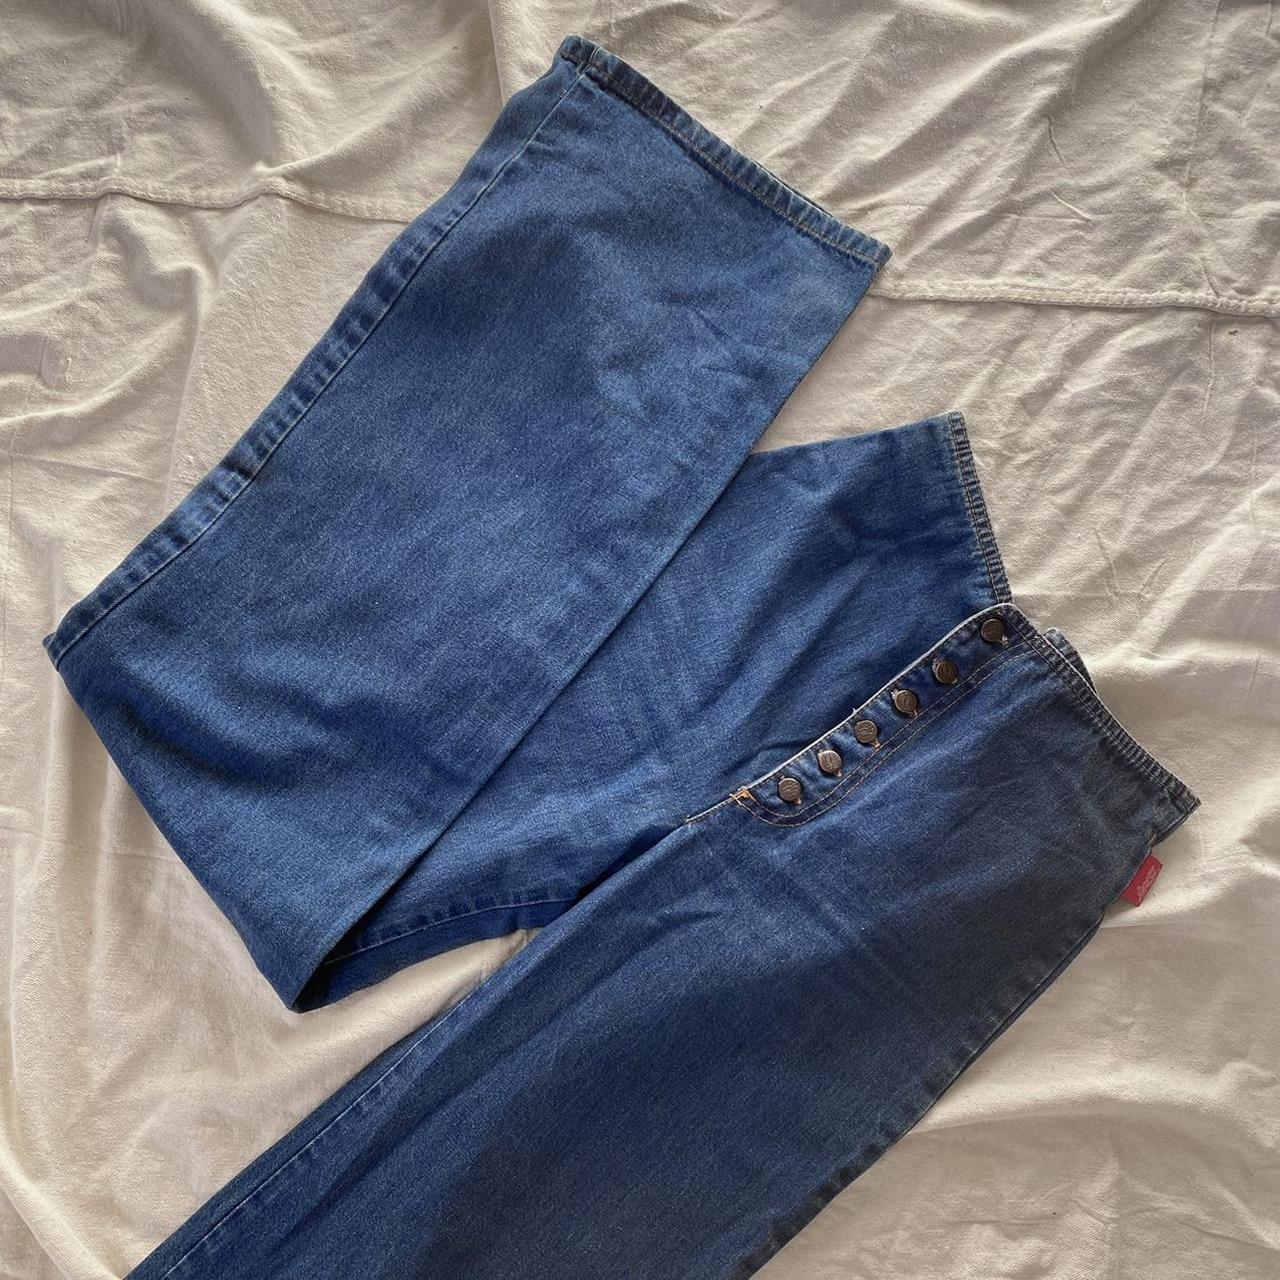 Love these incredible vintage 1970's, high-waisted,... - Depop